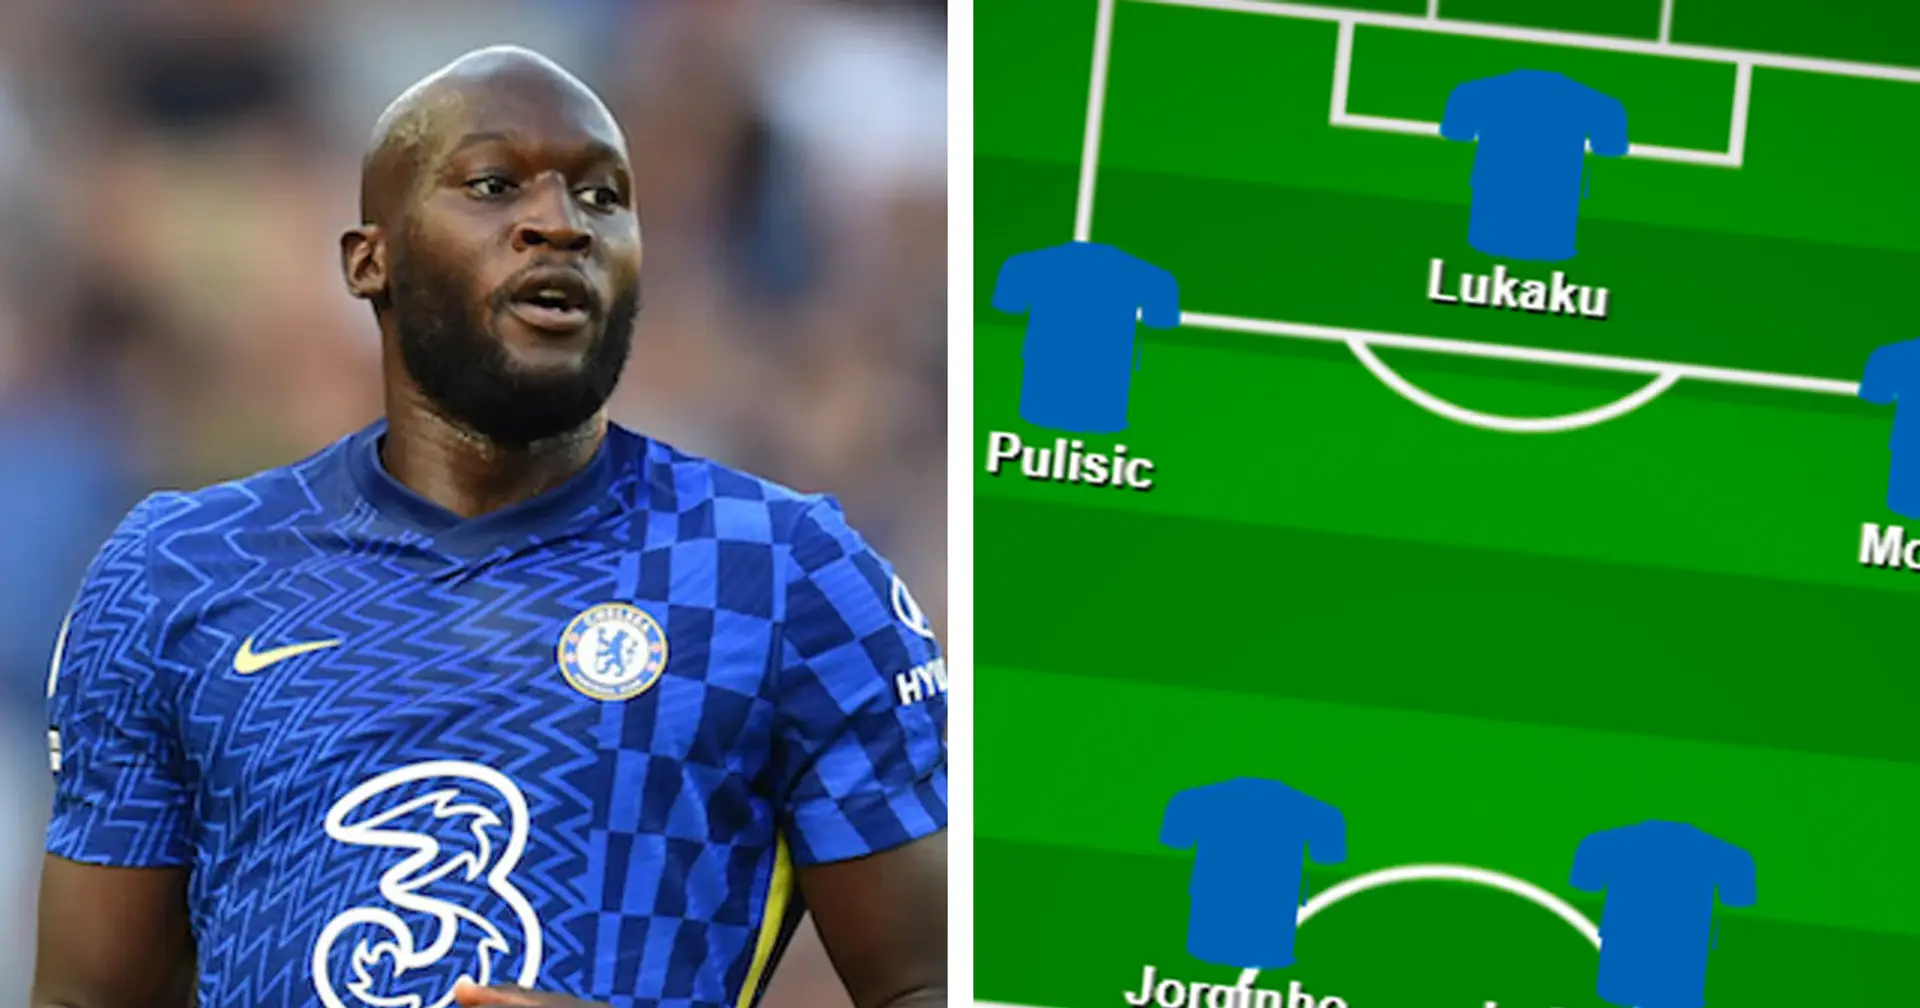 Lukaku to start: Chelsea fans pick their ultimate XI for West Ham game